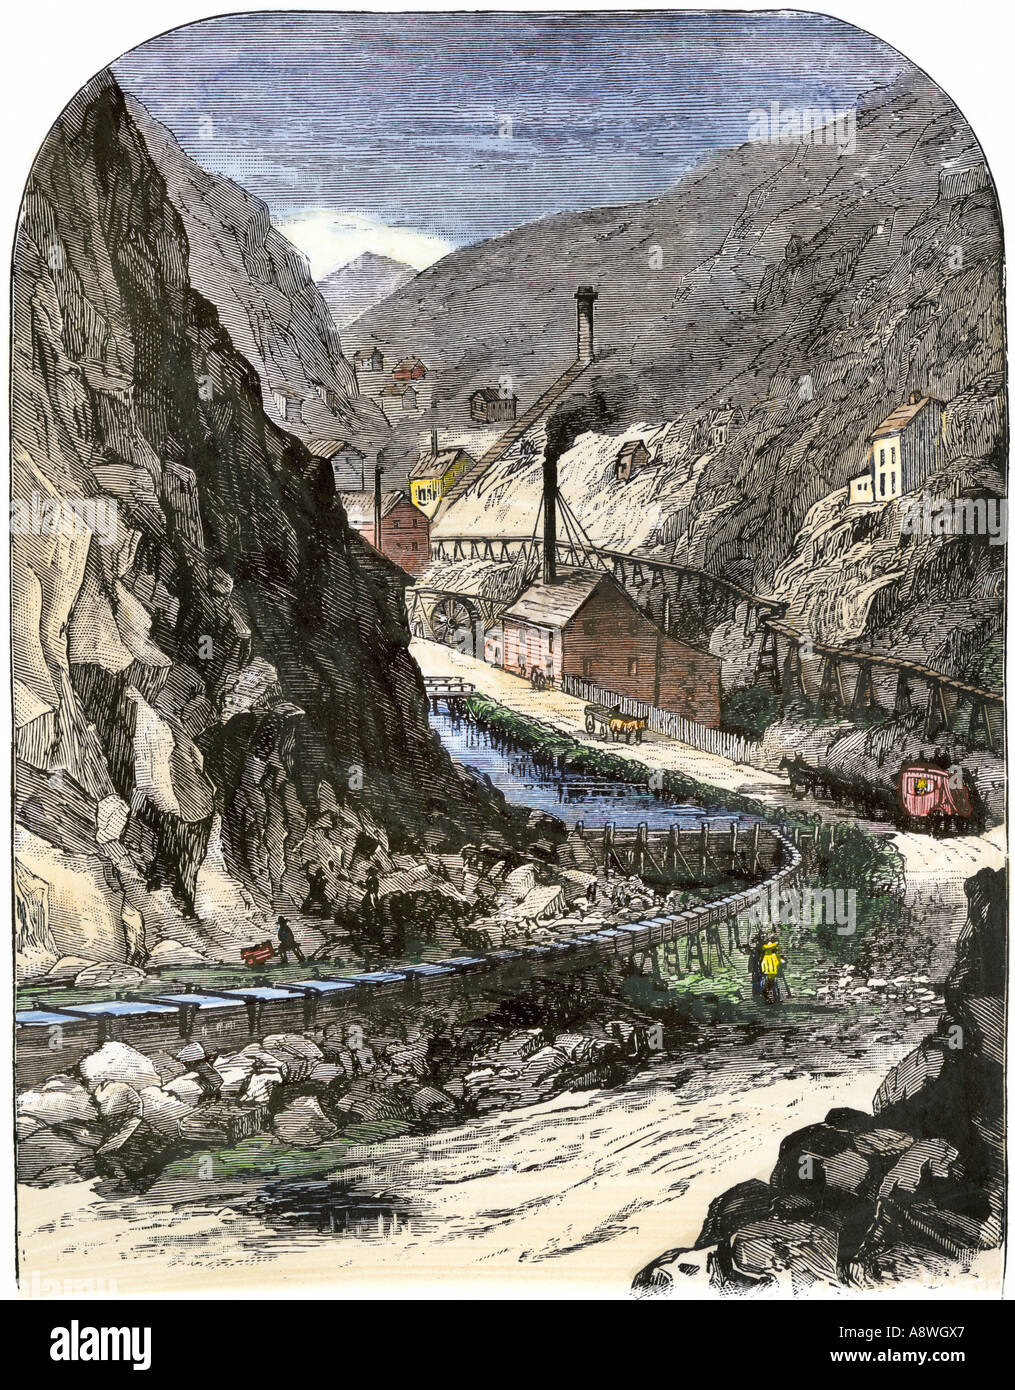 Gulch mining in the American west about 1890. Hand-colored woodcut Stock Photo